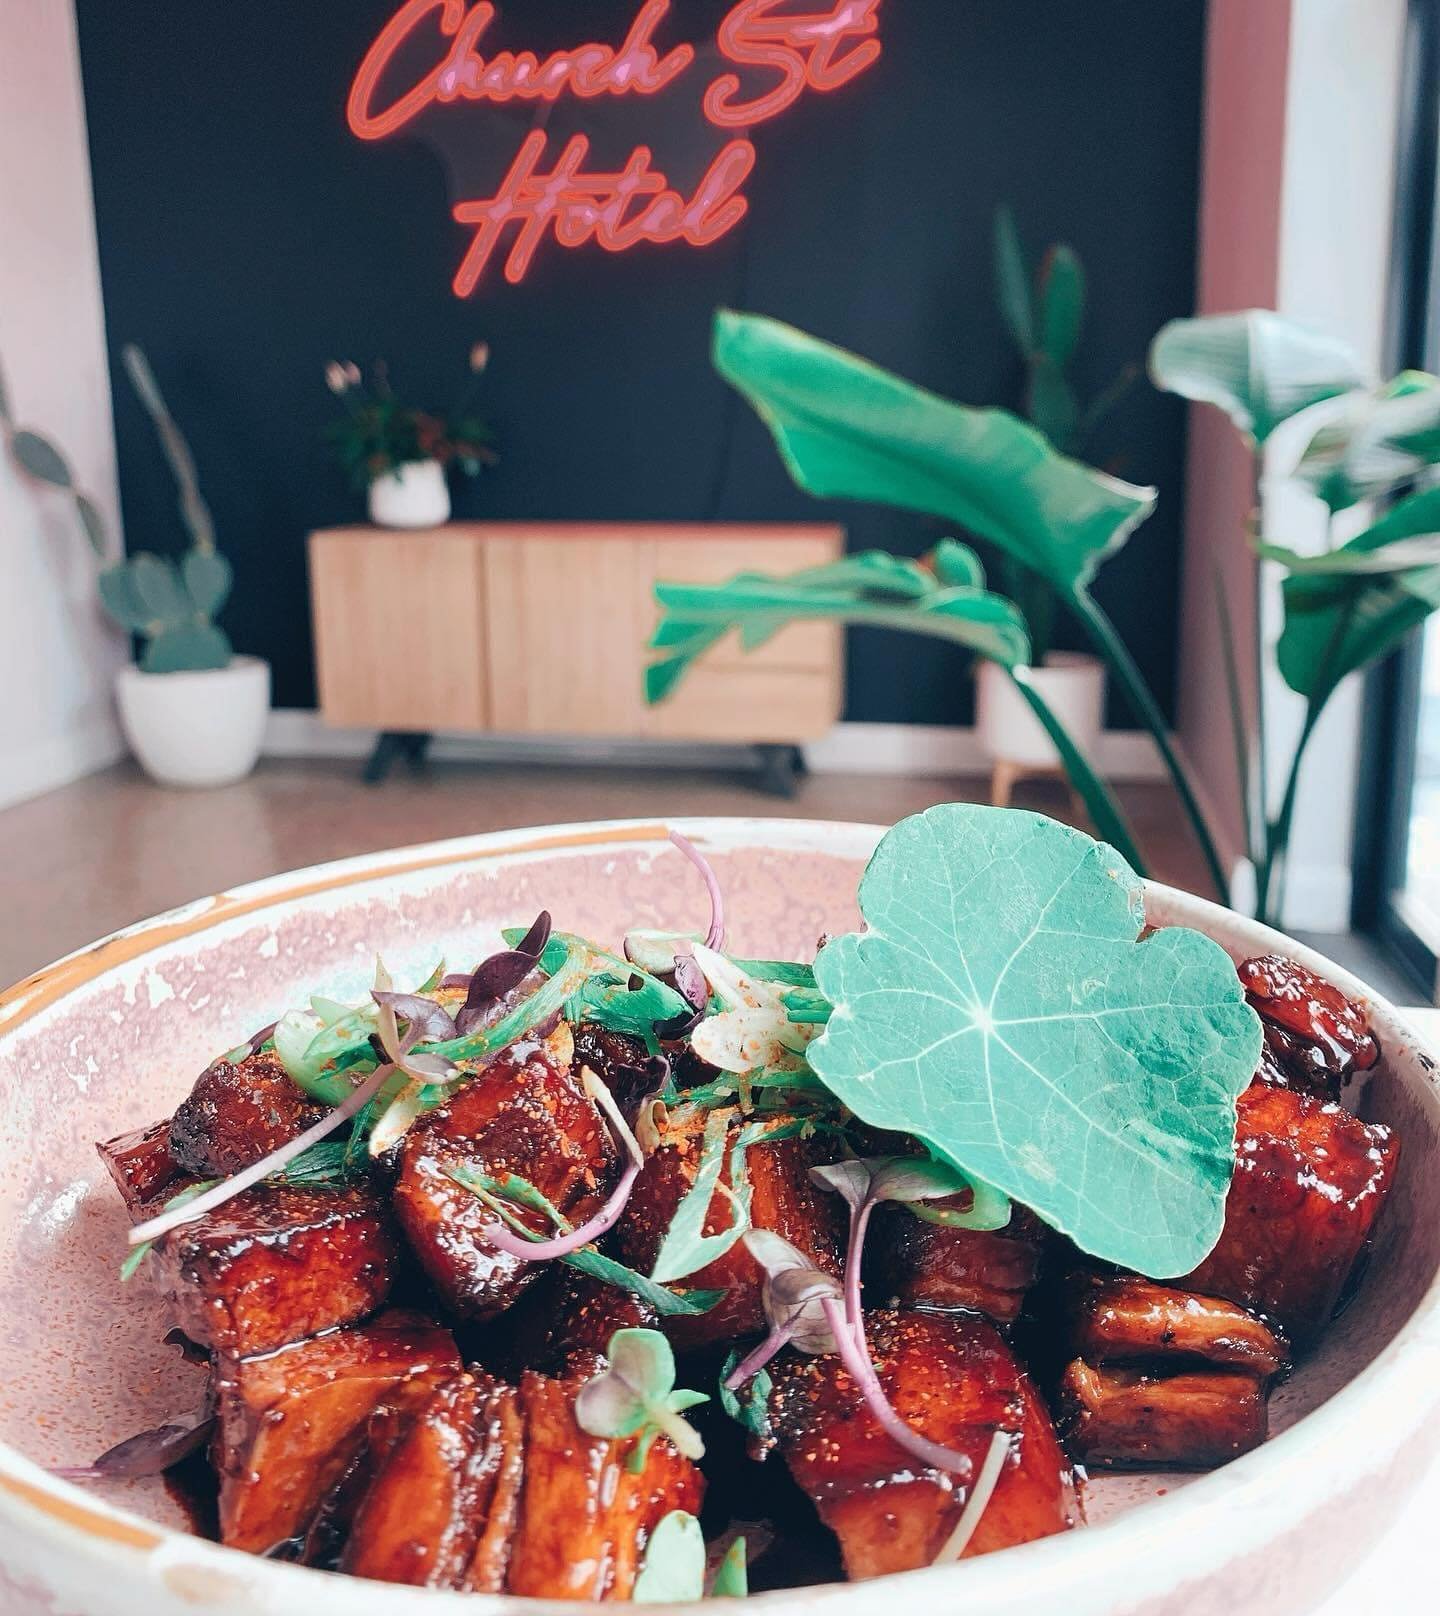 Goodbyes are hard! Over the next 10 days we are farewelling some old favourites! Today we pay homage to Our ℙ𝕠𝕣𝕜 𝔹𝕖𝕝𝕝𝕪 𝔹𝕚𝕥𝕖𝕤! Farewell them today- Pork belly bites available from 5.30! Trivia from 6.53! Feed your soul!